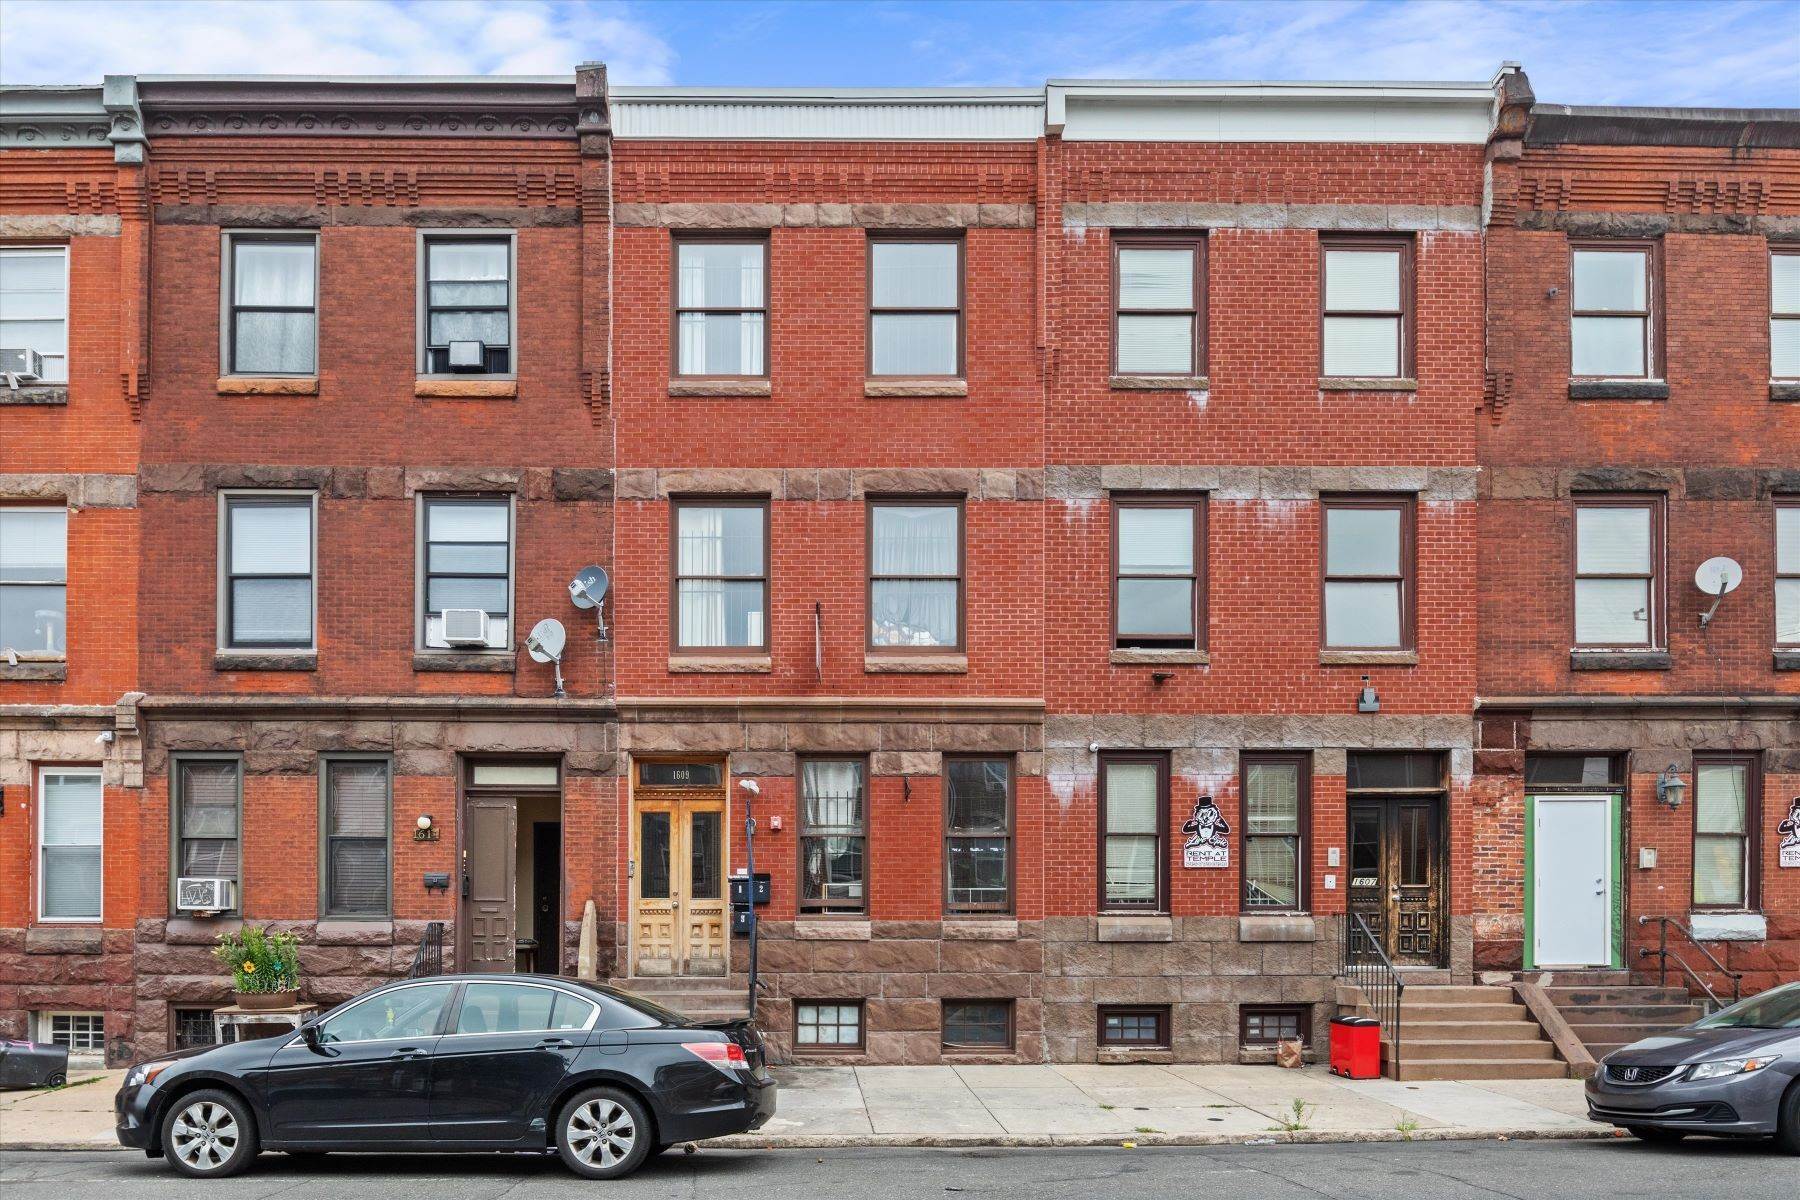 Multi-Family Homes for Sale at 1609 West Diamond street, Philadelphia, PA 19121 1609 West Diamond street Philadelphia, Pennsylvania 19121 United States